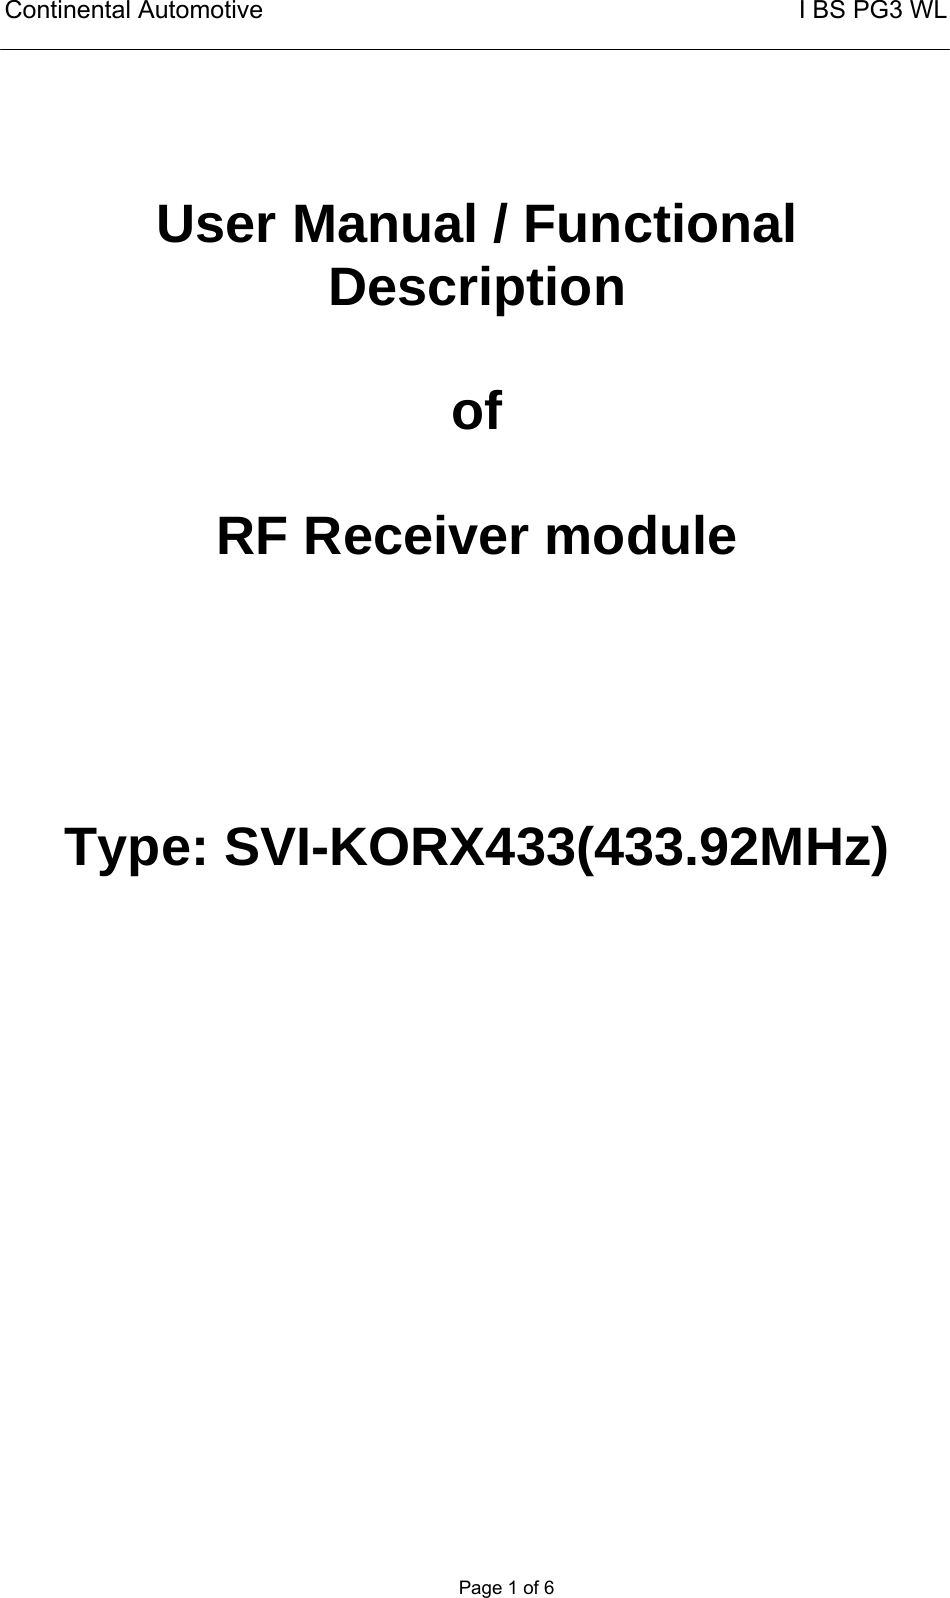 Continental Automotive                                                       I BS PG3 WL       Page 1 of 6   User Manual / Functional Description  of  RF Receiver module     Type: SVI-KORX433(433.92MHz)  